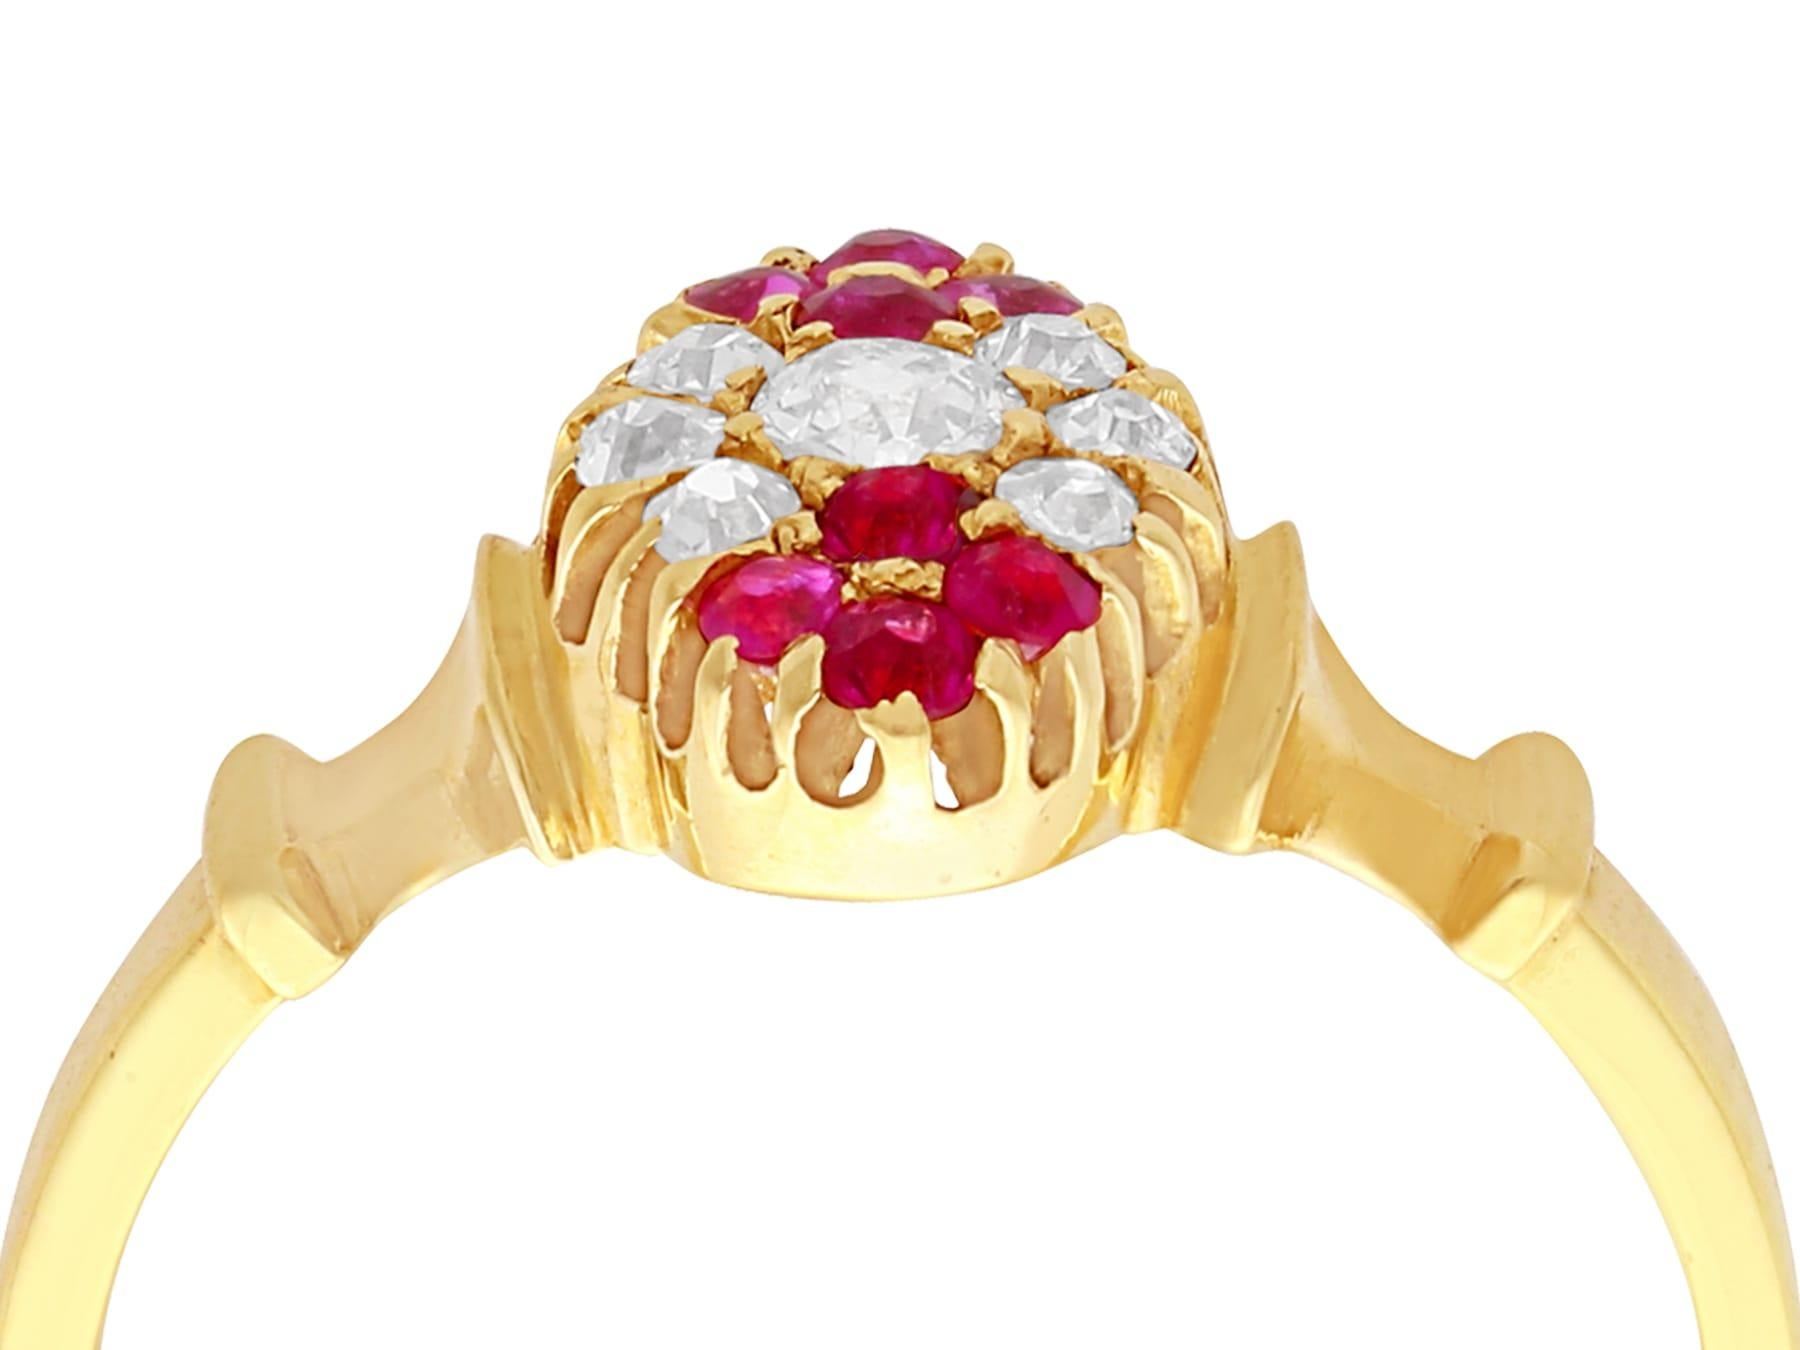 A fine and impressive antique Edwardian 0.28 carat diamond, 0.24 carat ruby cocktail ring in 18 karat yellow gold; part of our antique jewelry and estate jewelry collections.

This impressive Edwardian ruby ring has been crafted in 18k yellow